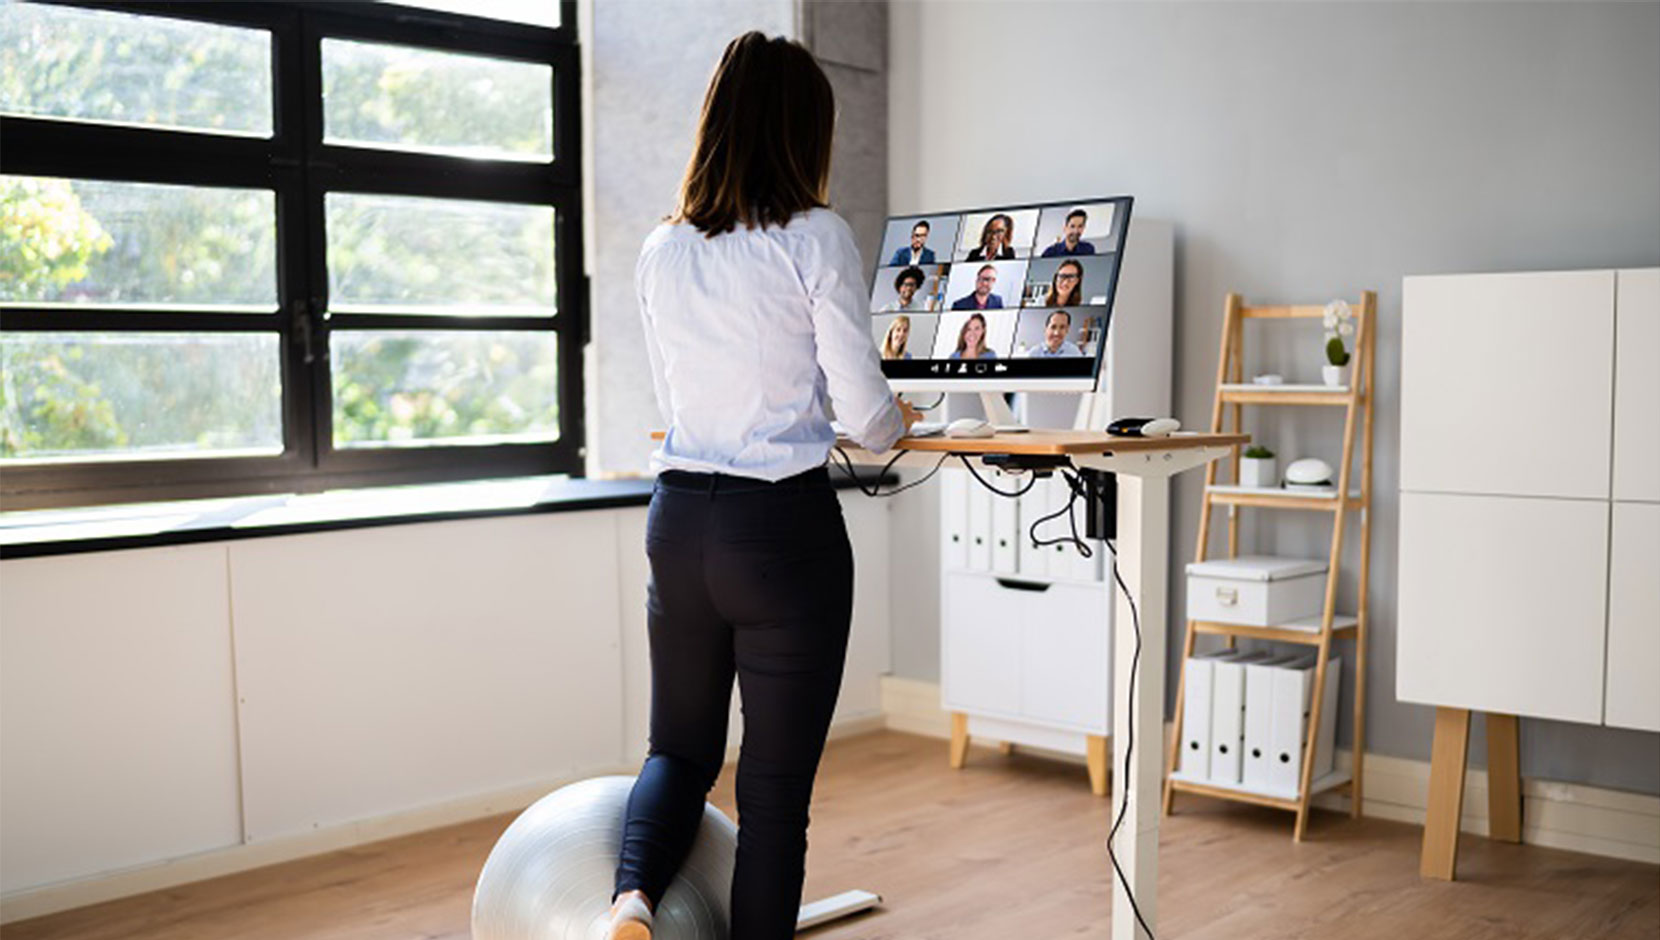 A person with dark shoulder length hair is participating in a virtual meeting, white resting their left leg on a ball at a standing desk.